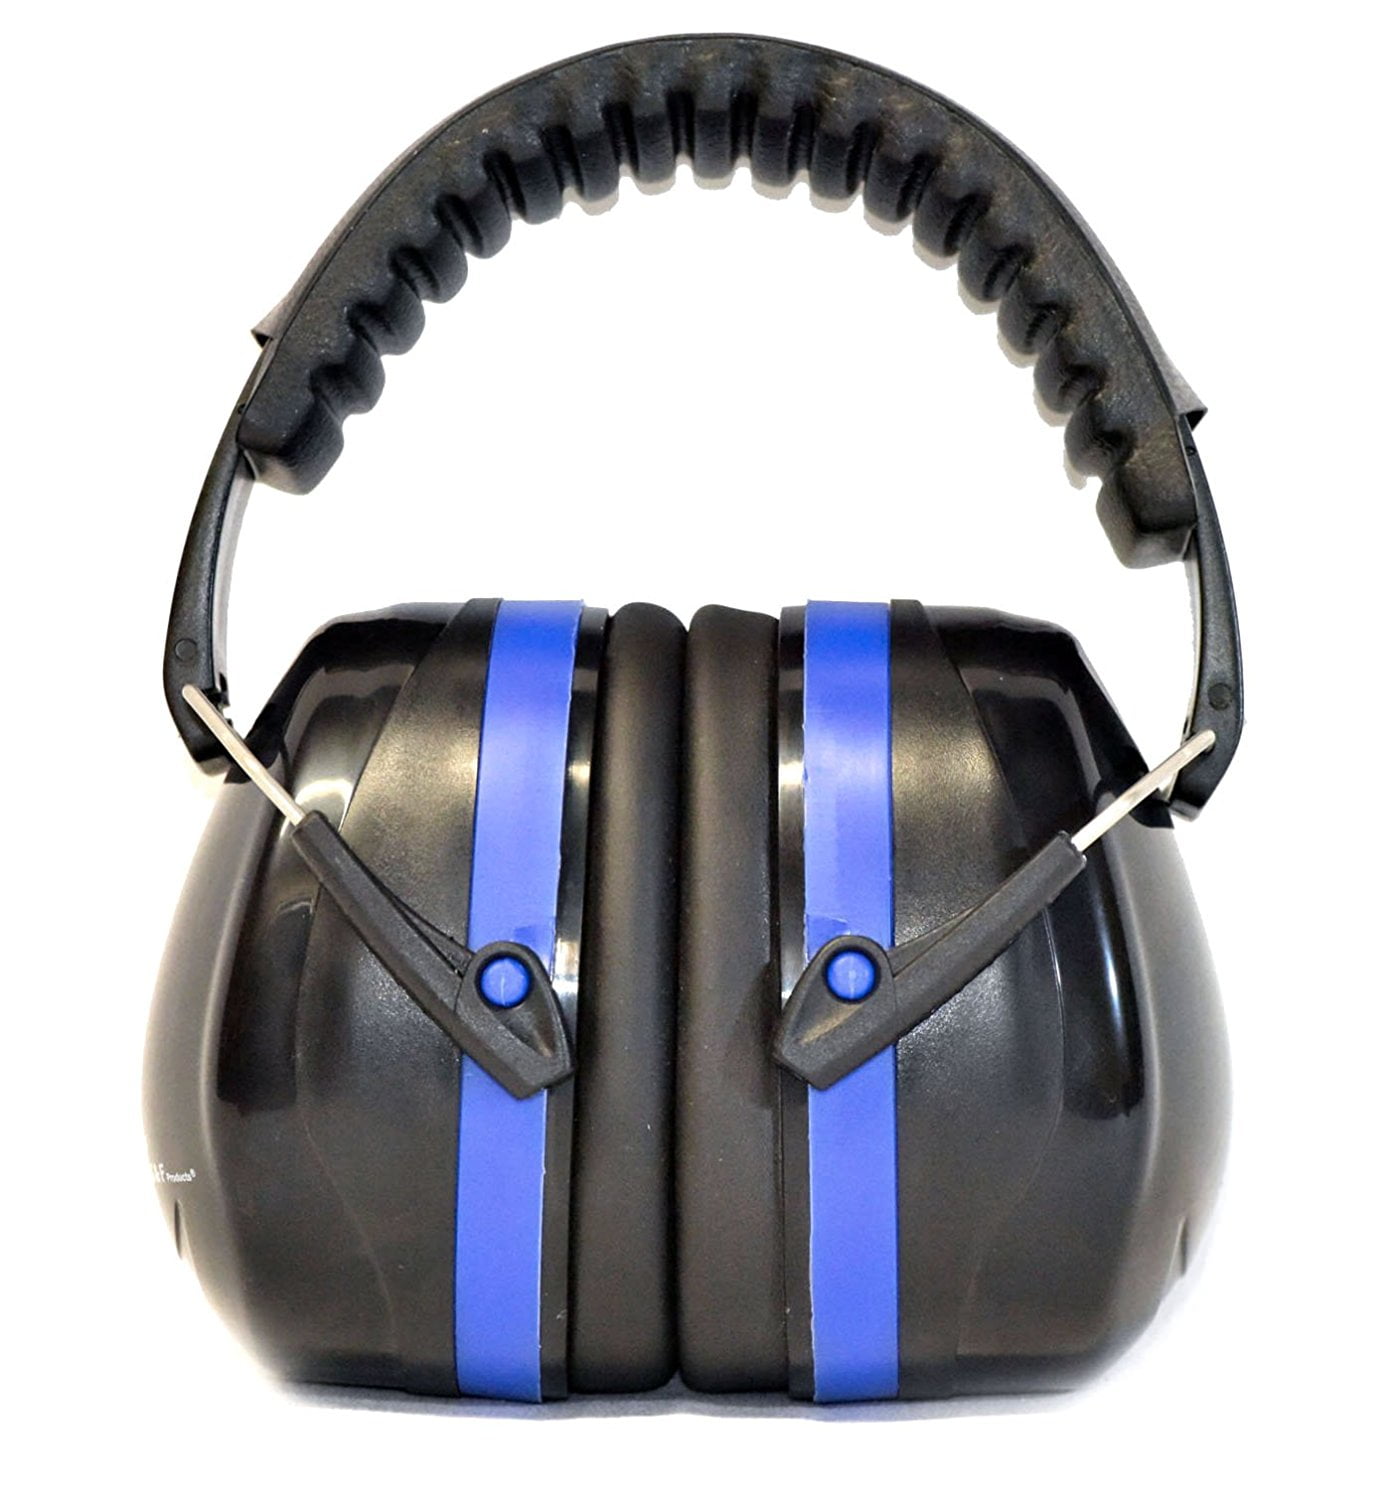 Titus XL Earmuffs Hearing Protection Blue Eagle 24 NRR Rated 